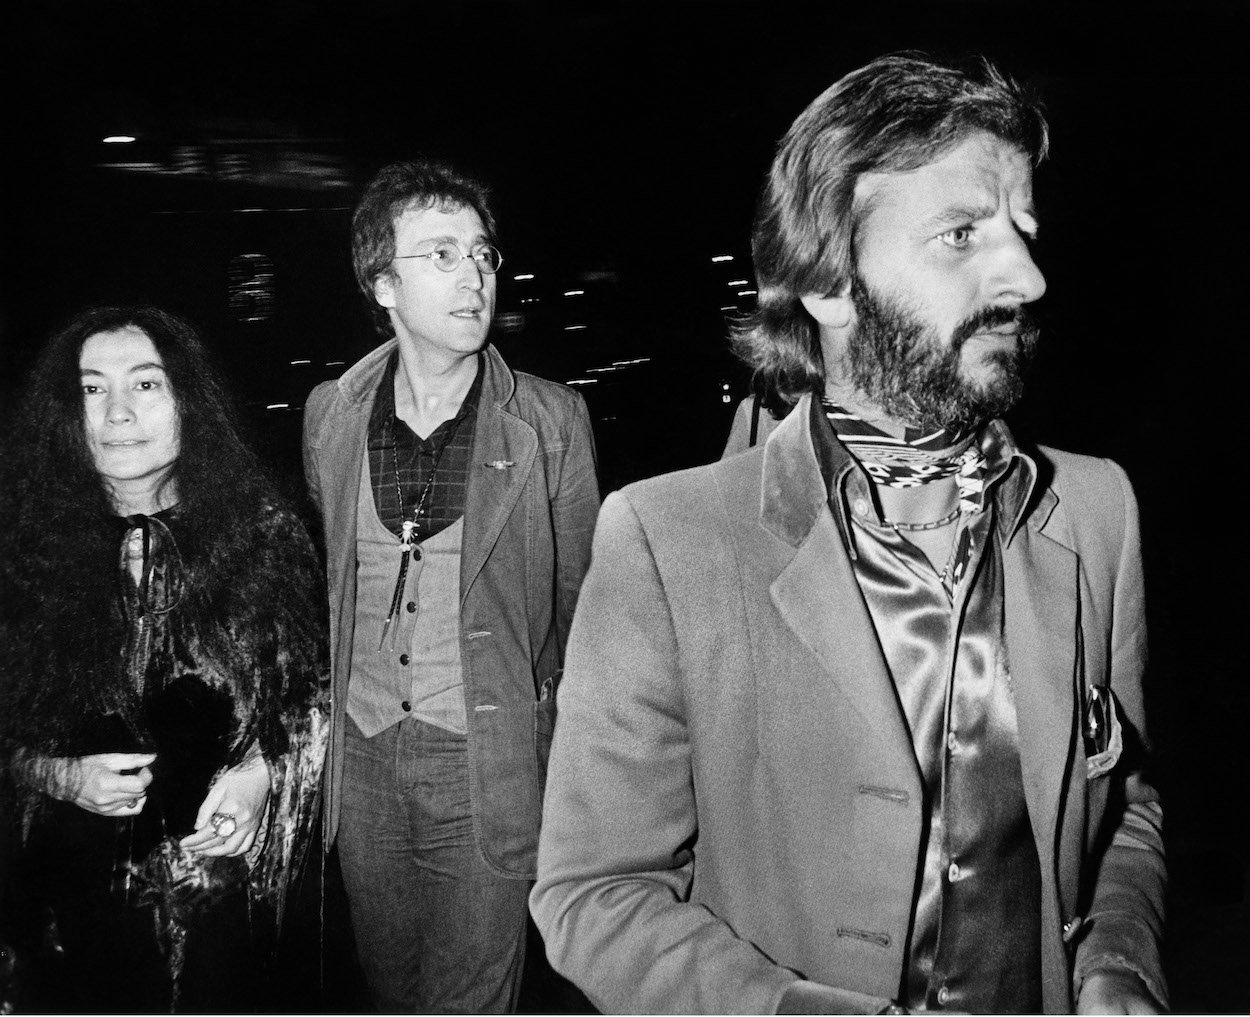 Yoko Ono (from left), John Lennon, and Ringo Starr, their answer to Yoko Ono around The Beatles is the real Ringo, arrive at a Los Angeles club in 1975.